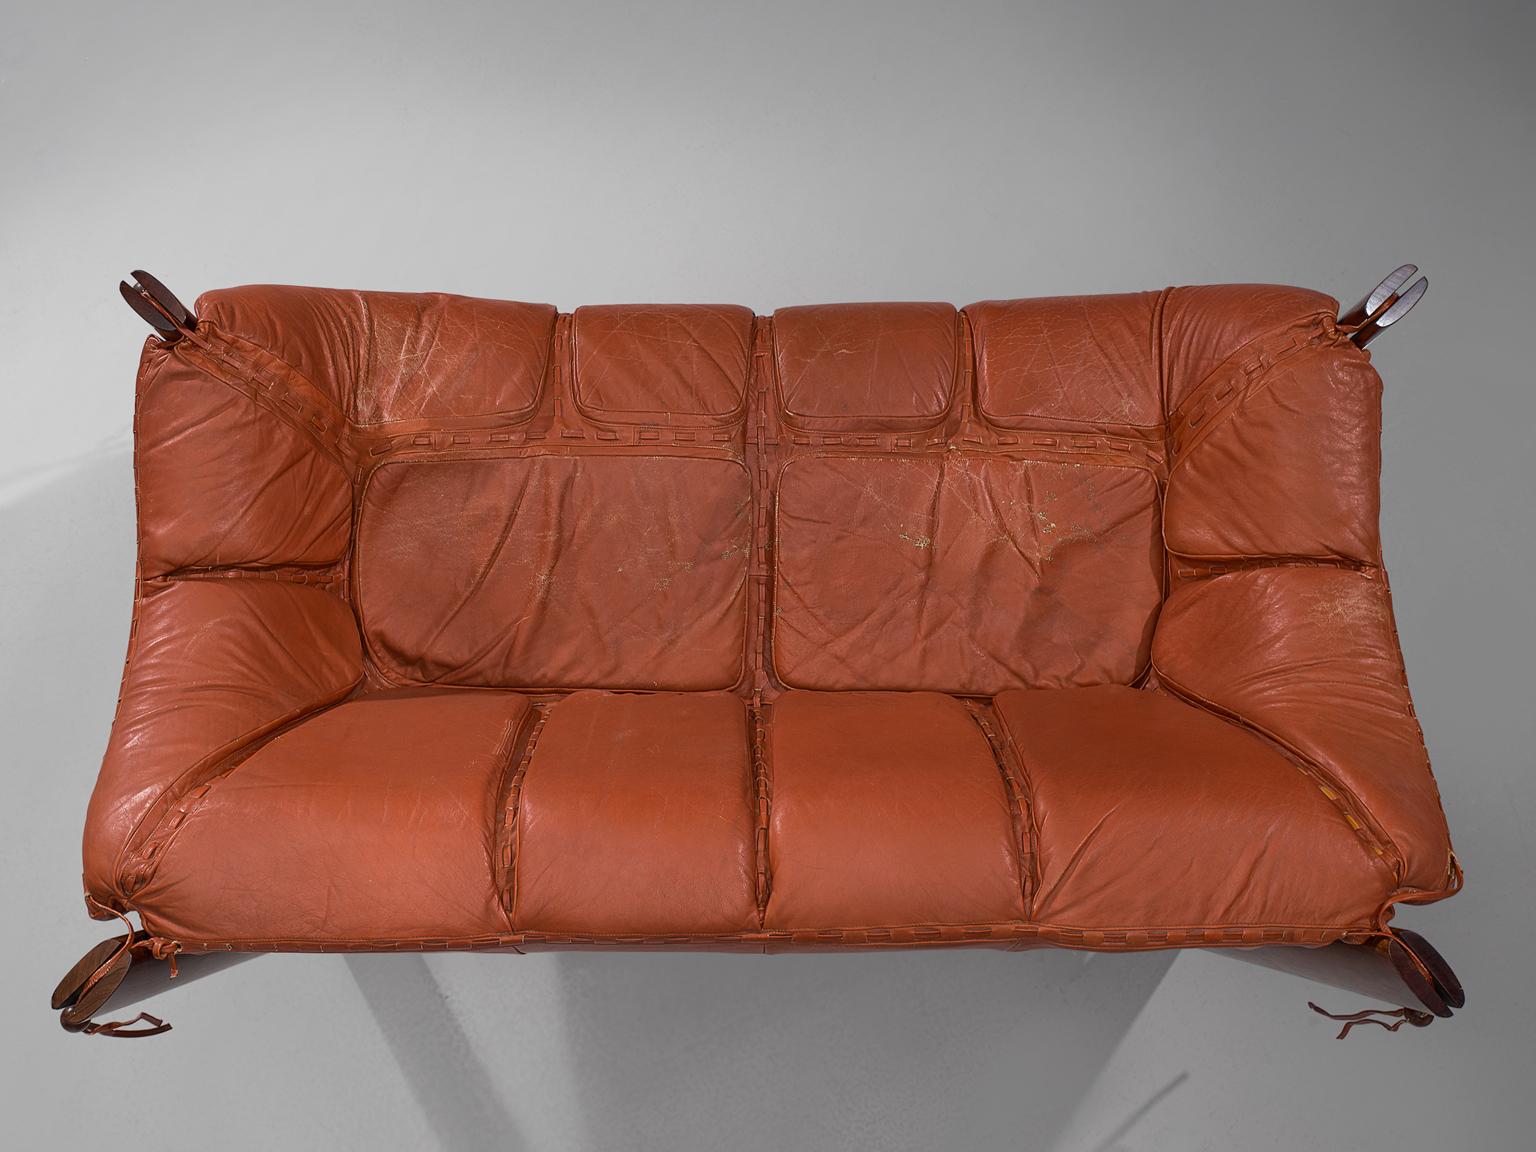 Late 20th Century Percival Lafer Two-Seat Sofa in Rosewood and Red Leather